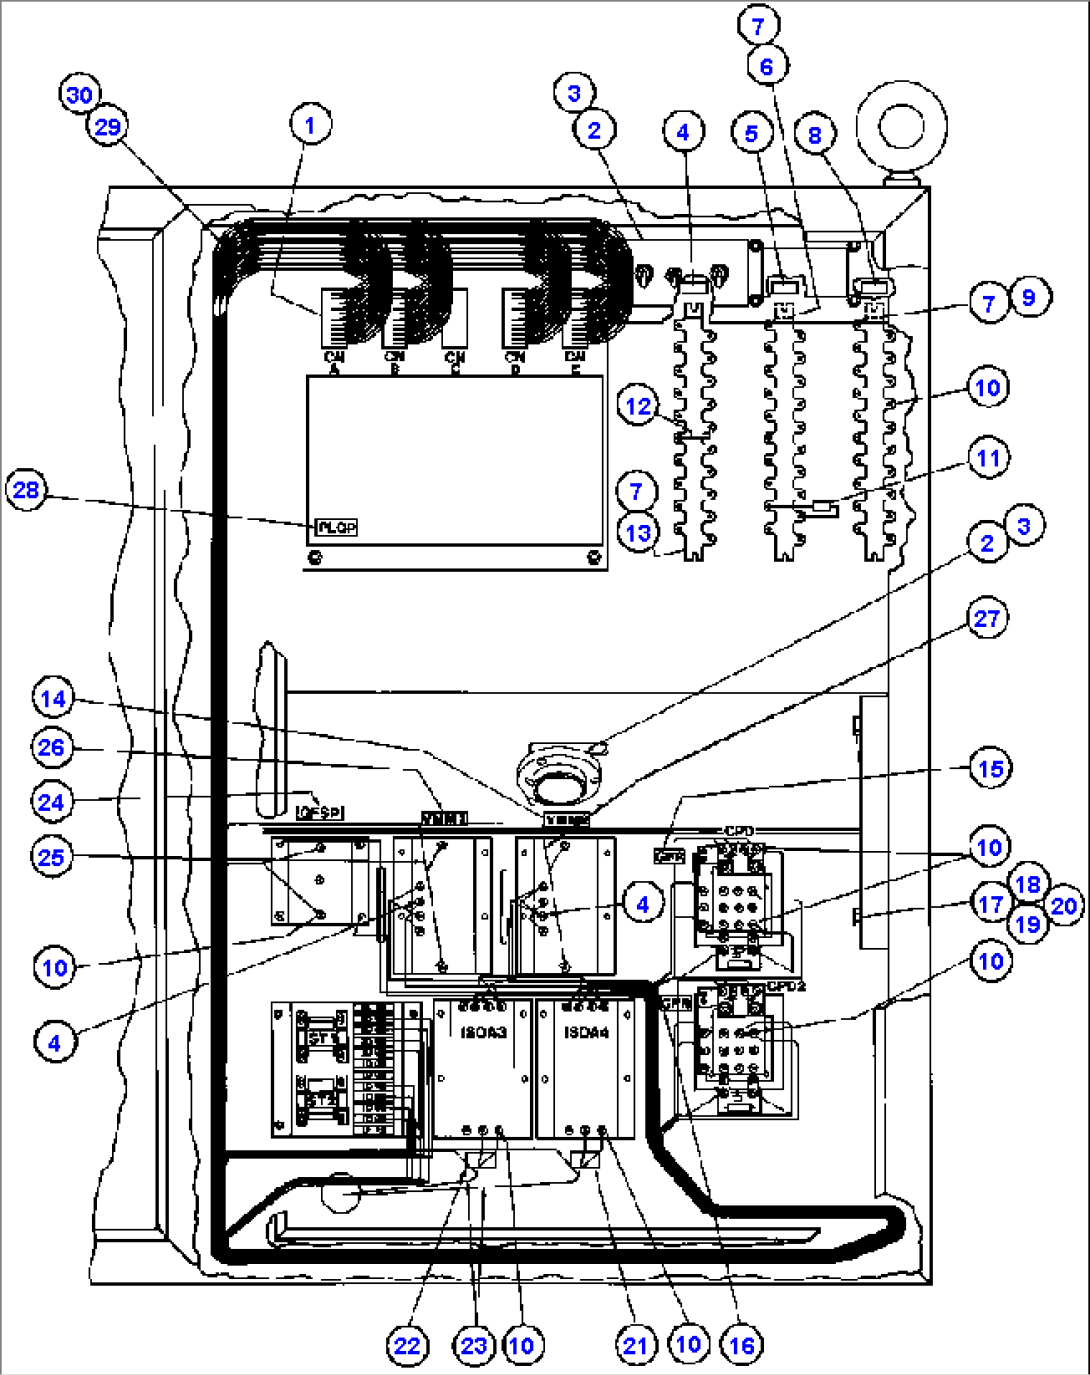 CONTROL CABINET WIRING - 1